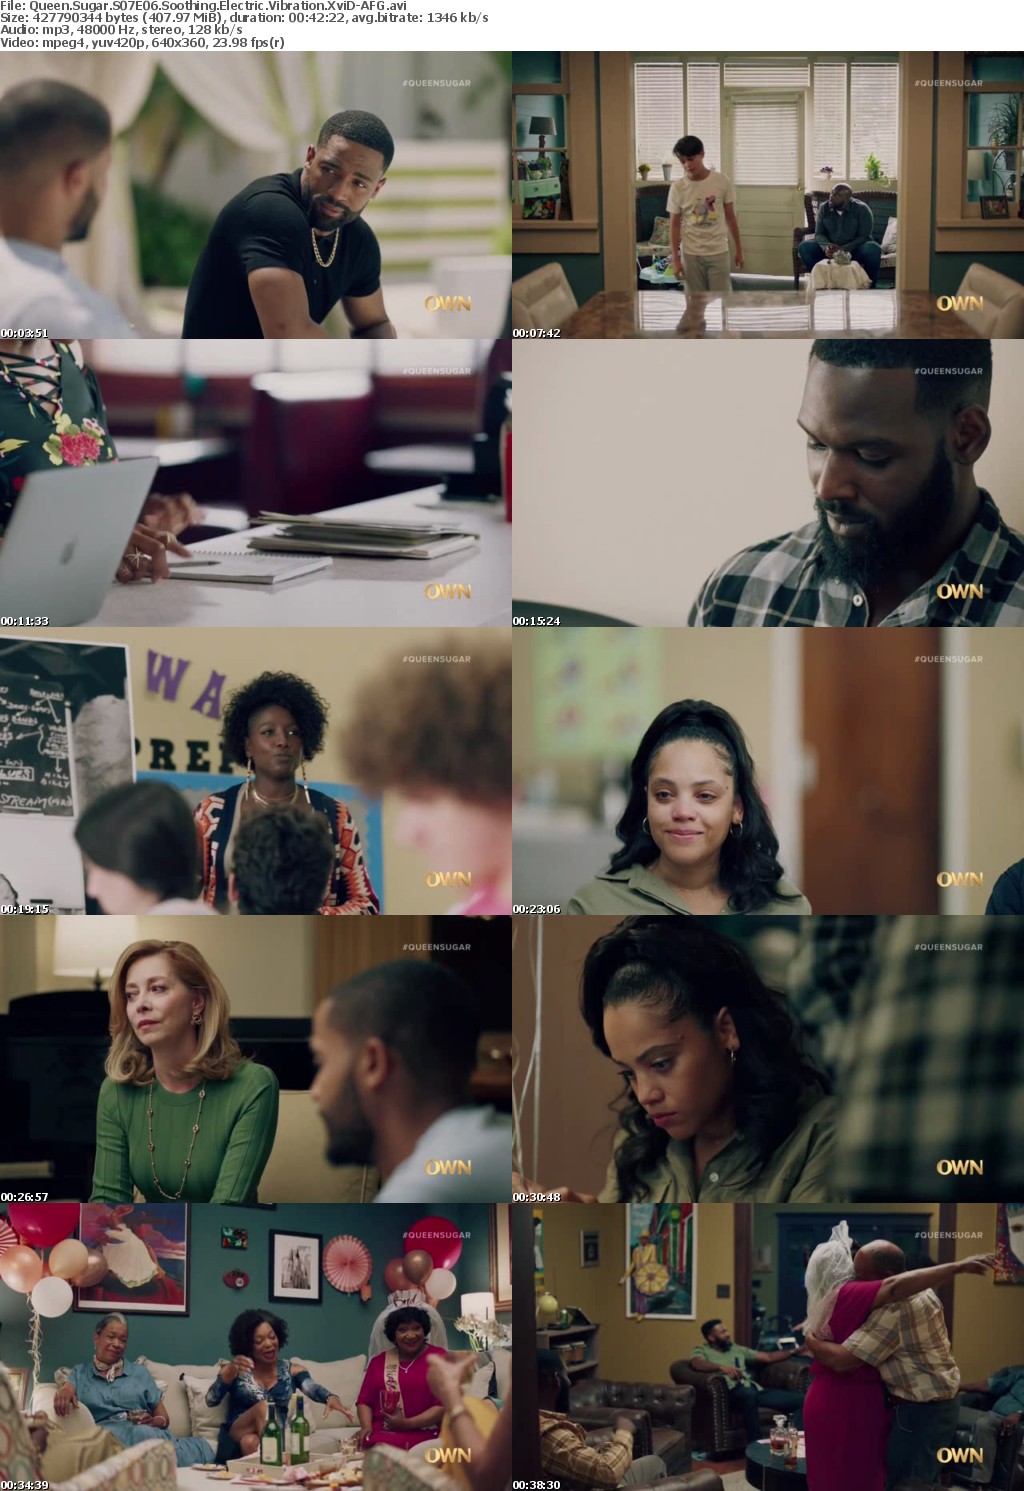 Queen Sugar S07E06 Soothing Electric Vibration XviD-AFG